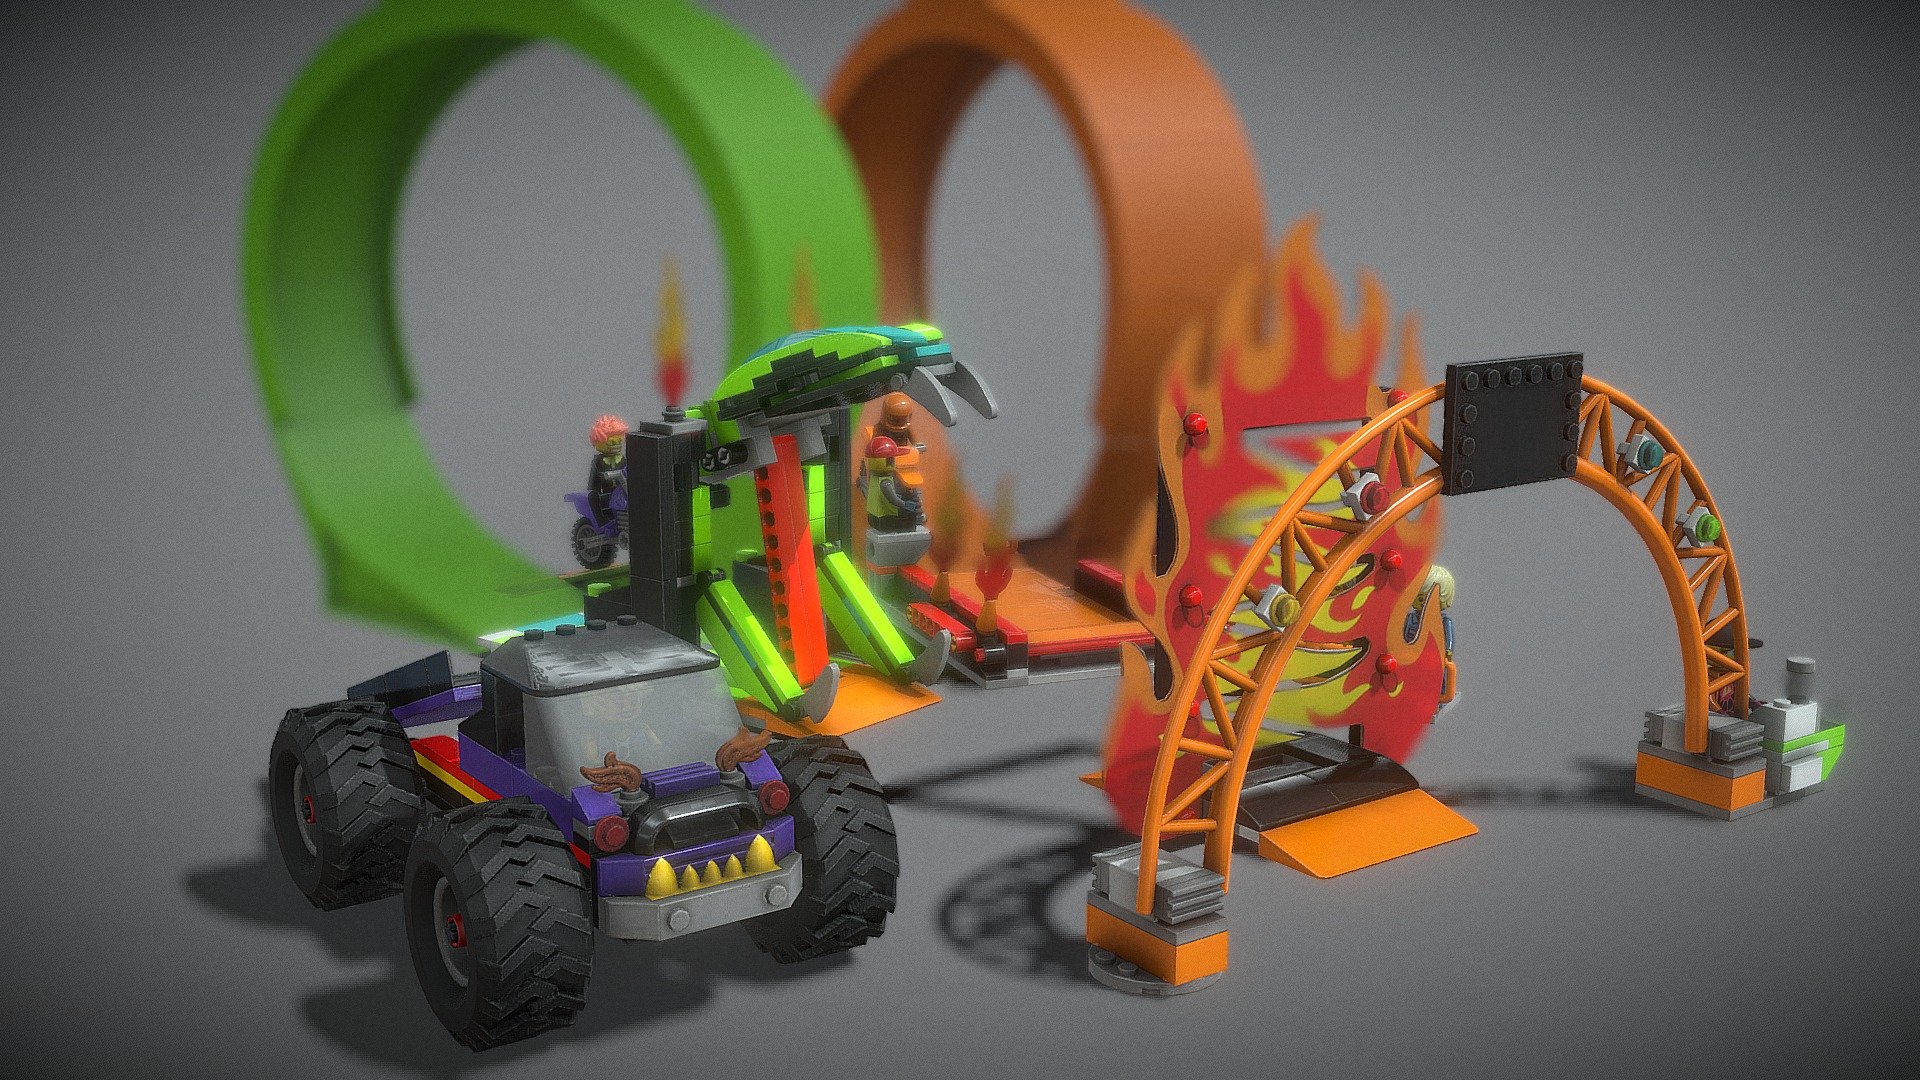 Lego - Double loop stunt arena - 3D model by Guillermo Momplet (@momplet) 3d model